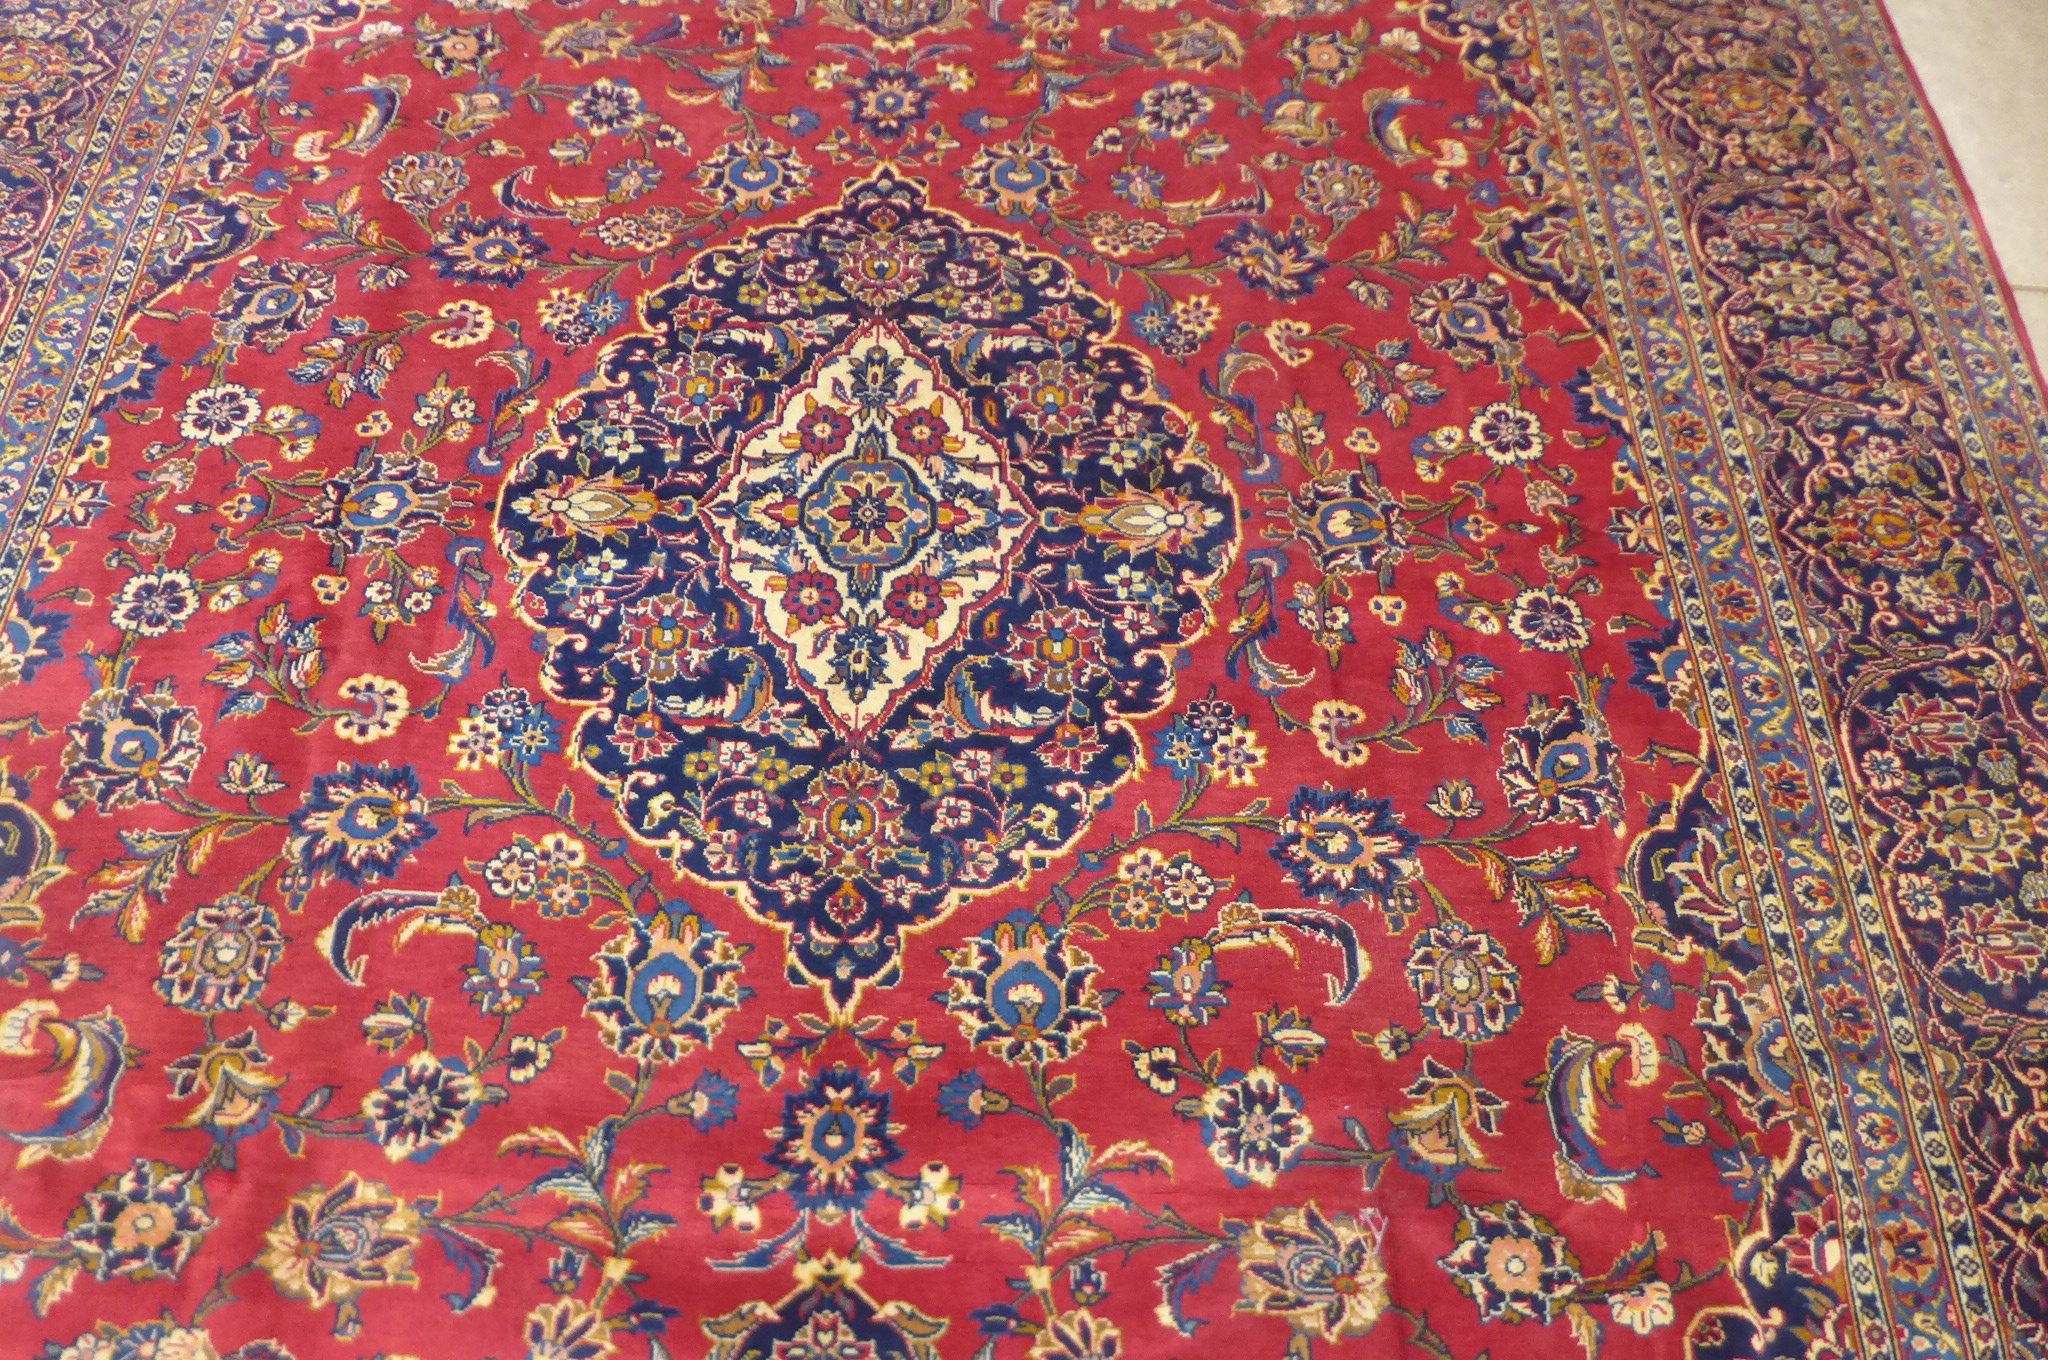 A hand knotted woollen Kashan rug - 380cm x 267cm - Image 2 of 3